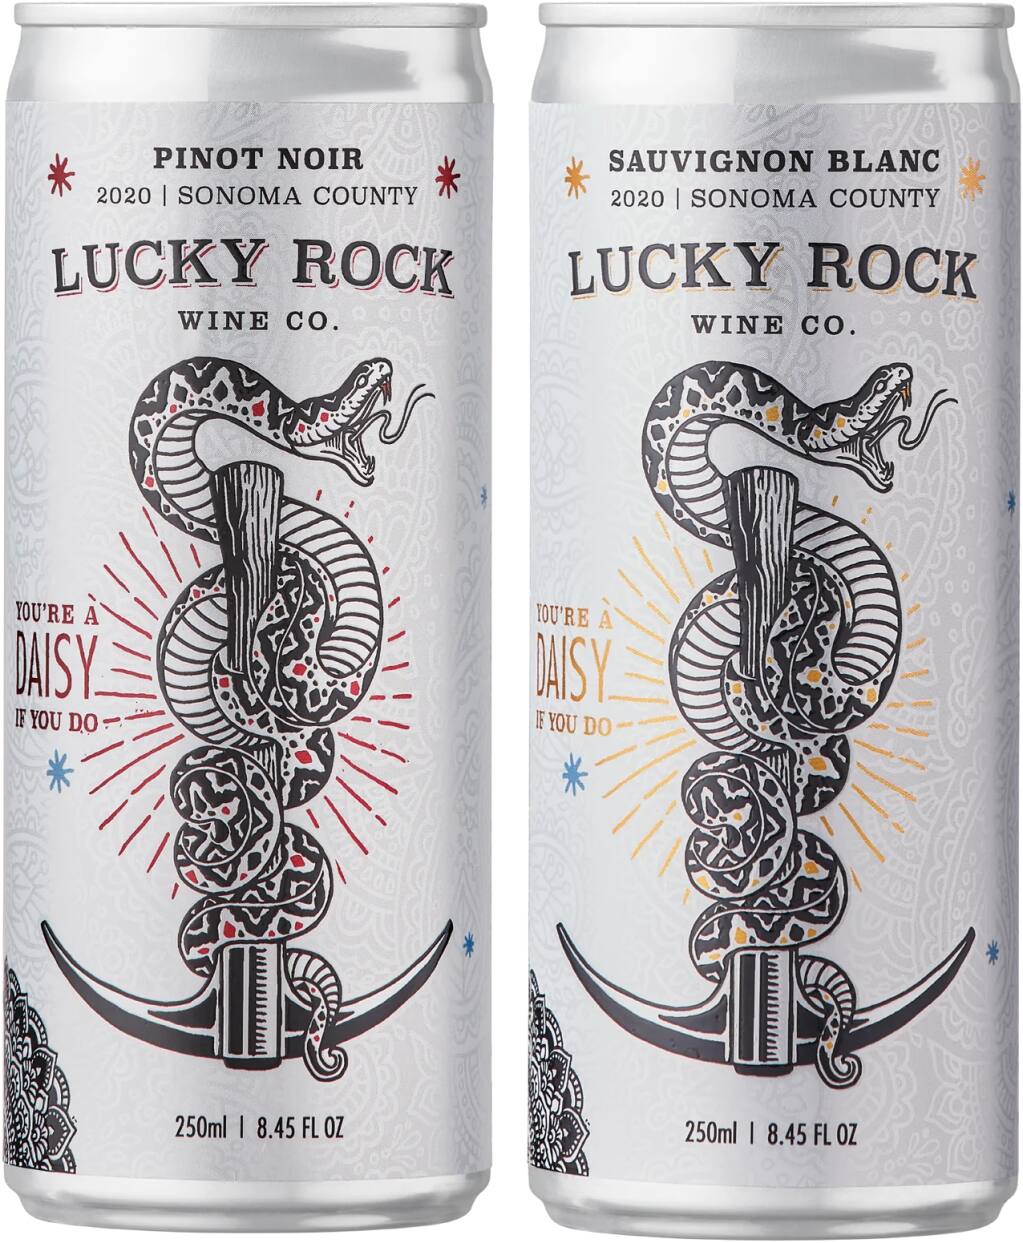 Tincknell & Tincknell helped market the launch of Aaron and Jessie Inman’s Santa Rosa-based Lucky Rock Wine Co. in 250-milliliter aluminum cans in 2021. (courtesy of Tincknell & Tincknell)